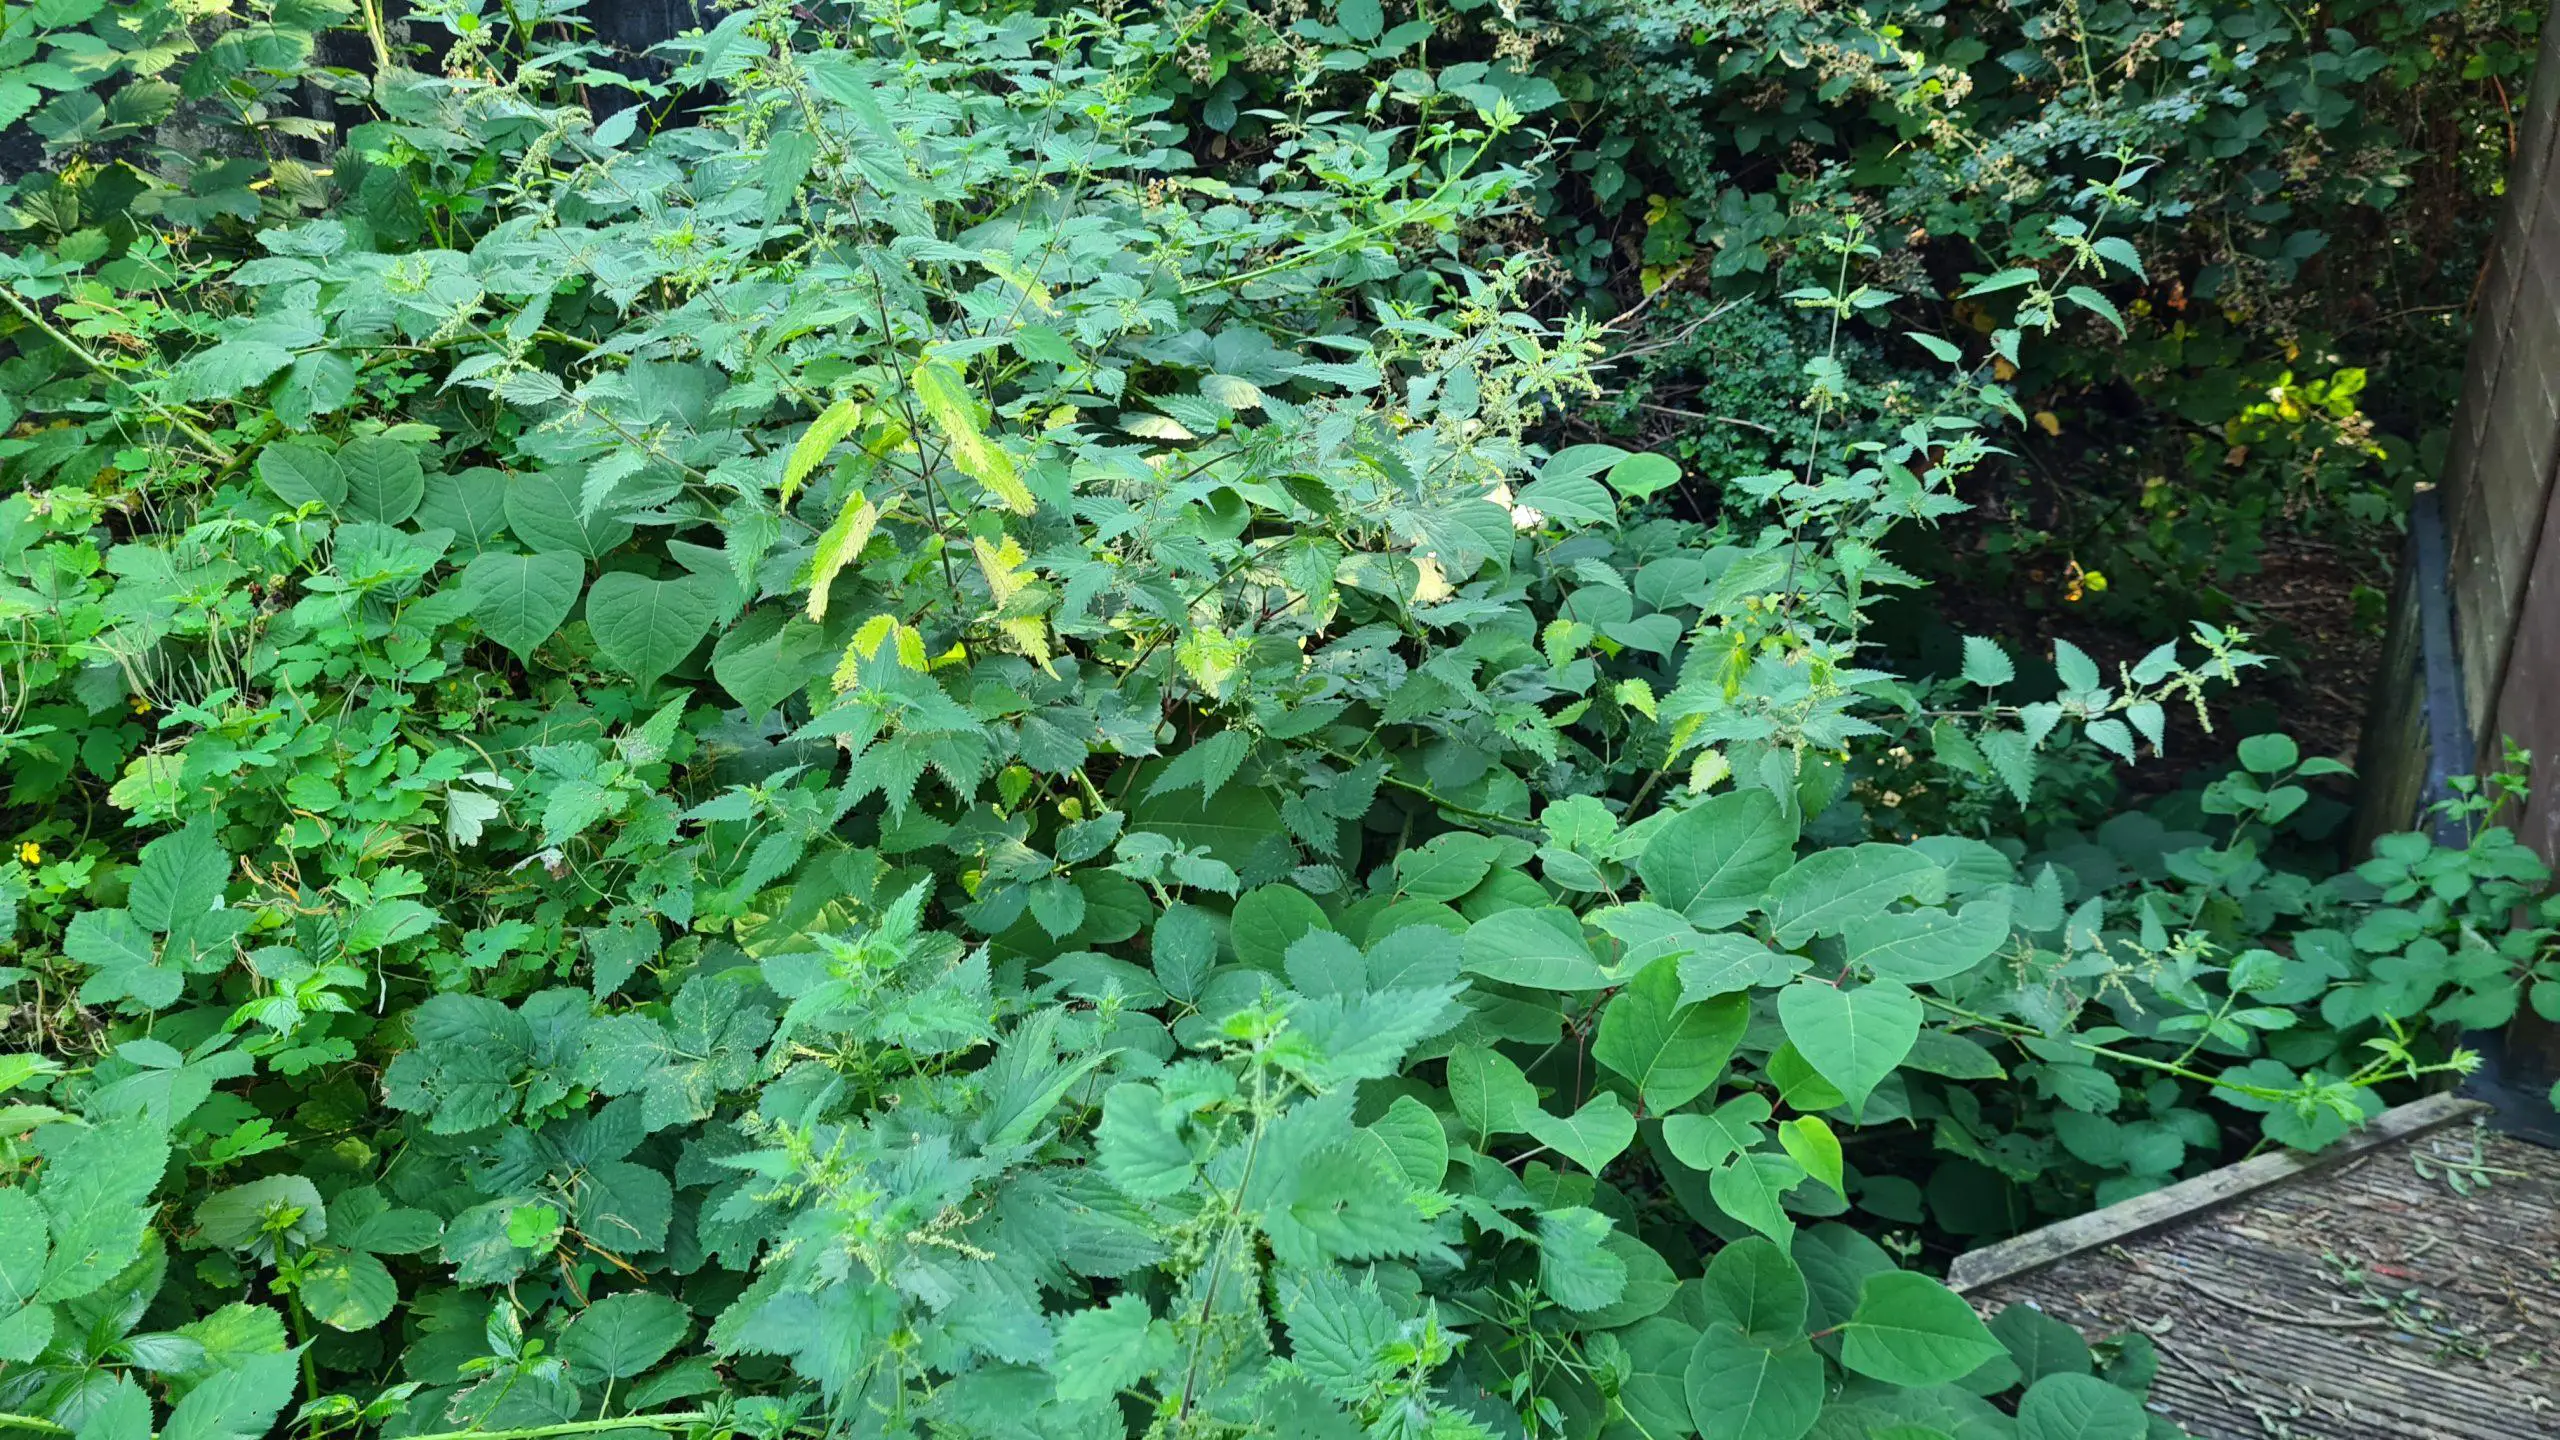 Mix of invasive weeds typically come together and consume an area from native plants